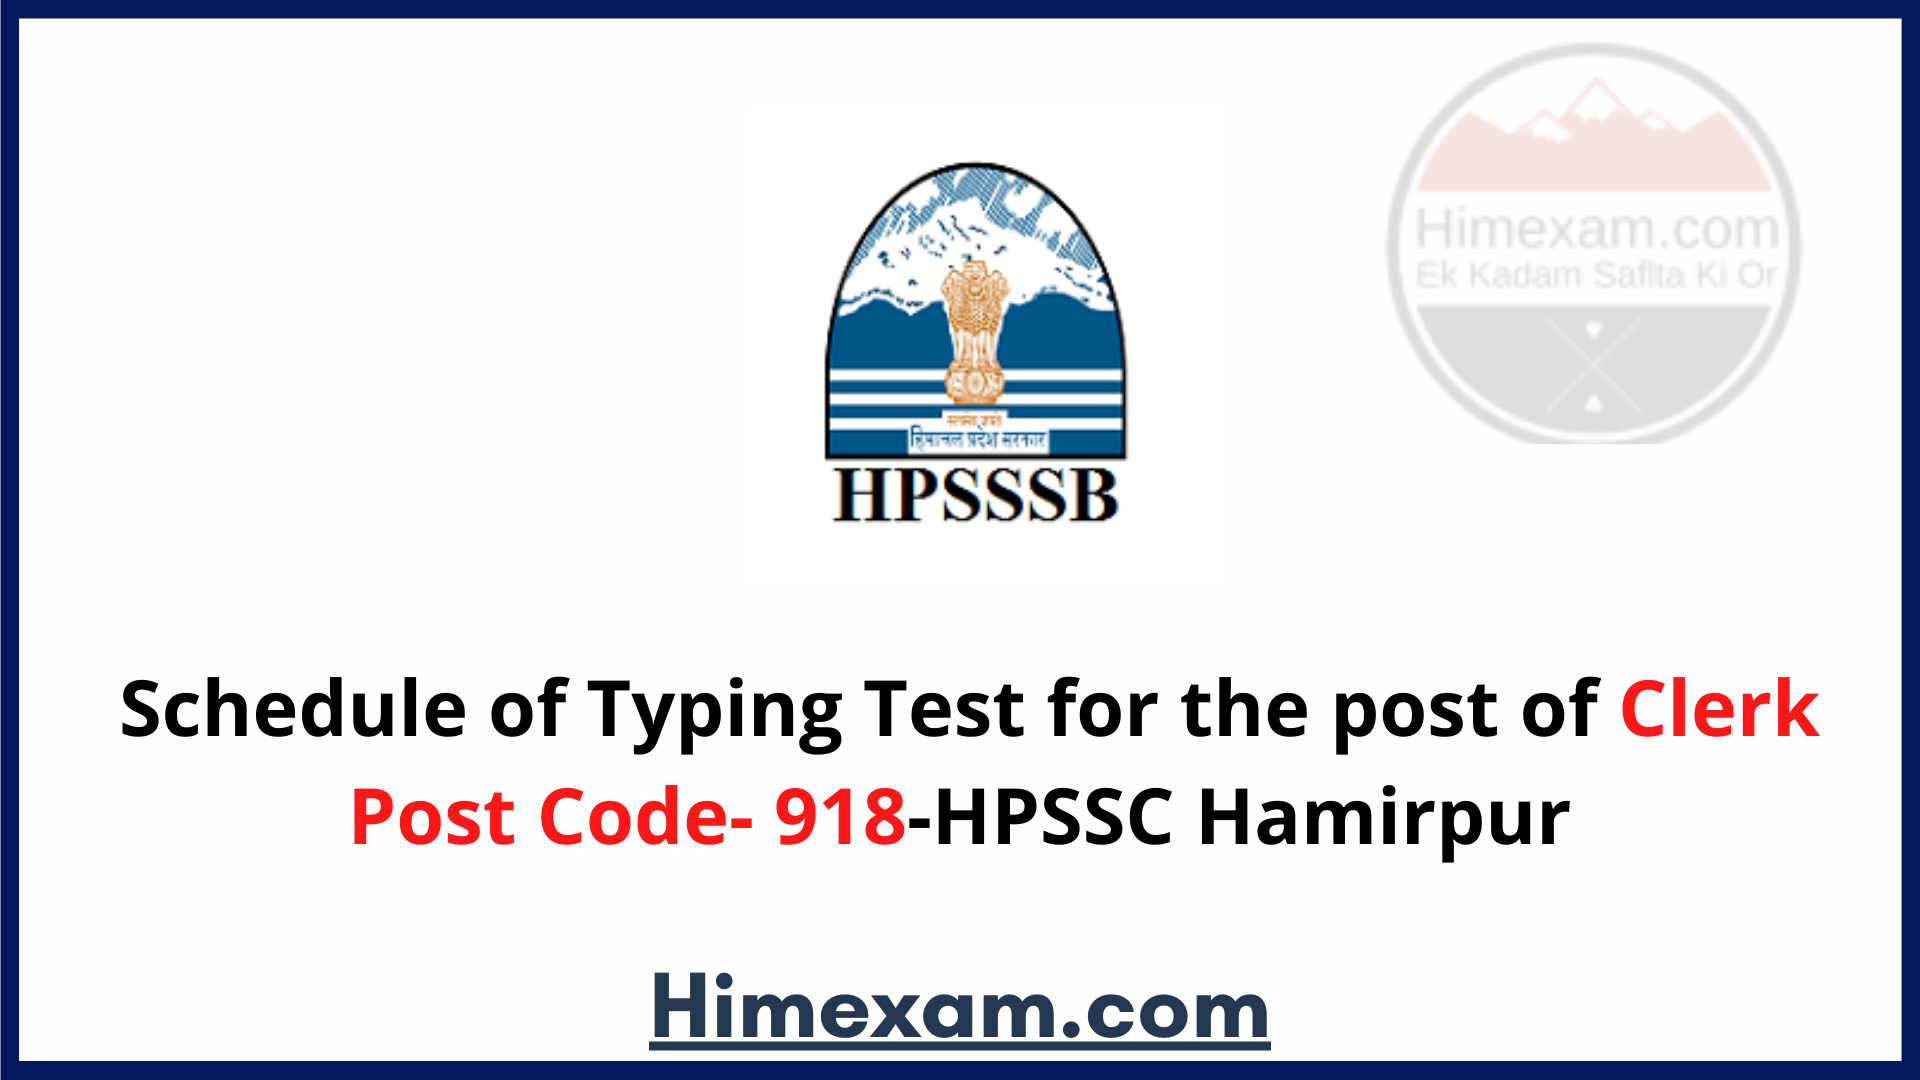 Schedule of Typing Test for the post of Clerk Post Code- 918-HPSSC Hamirpur